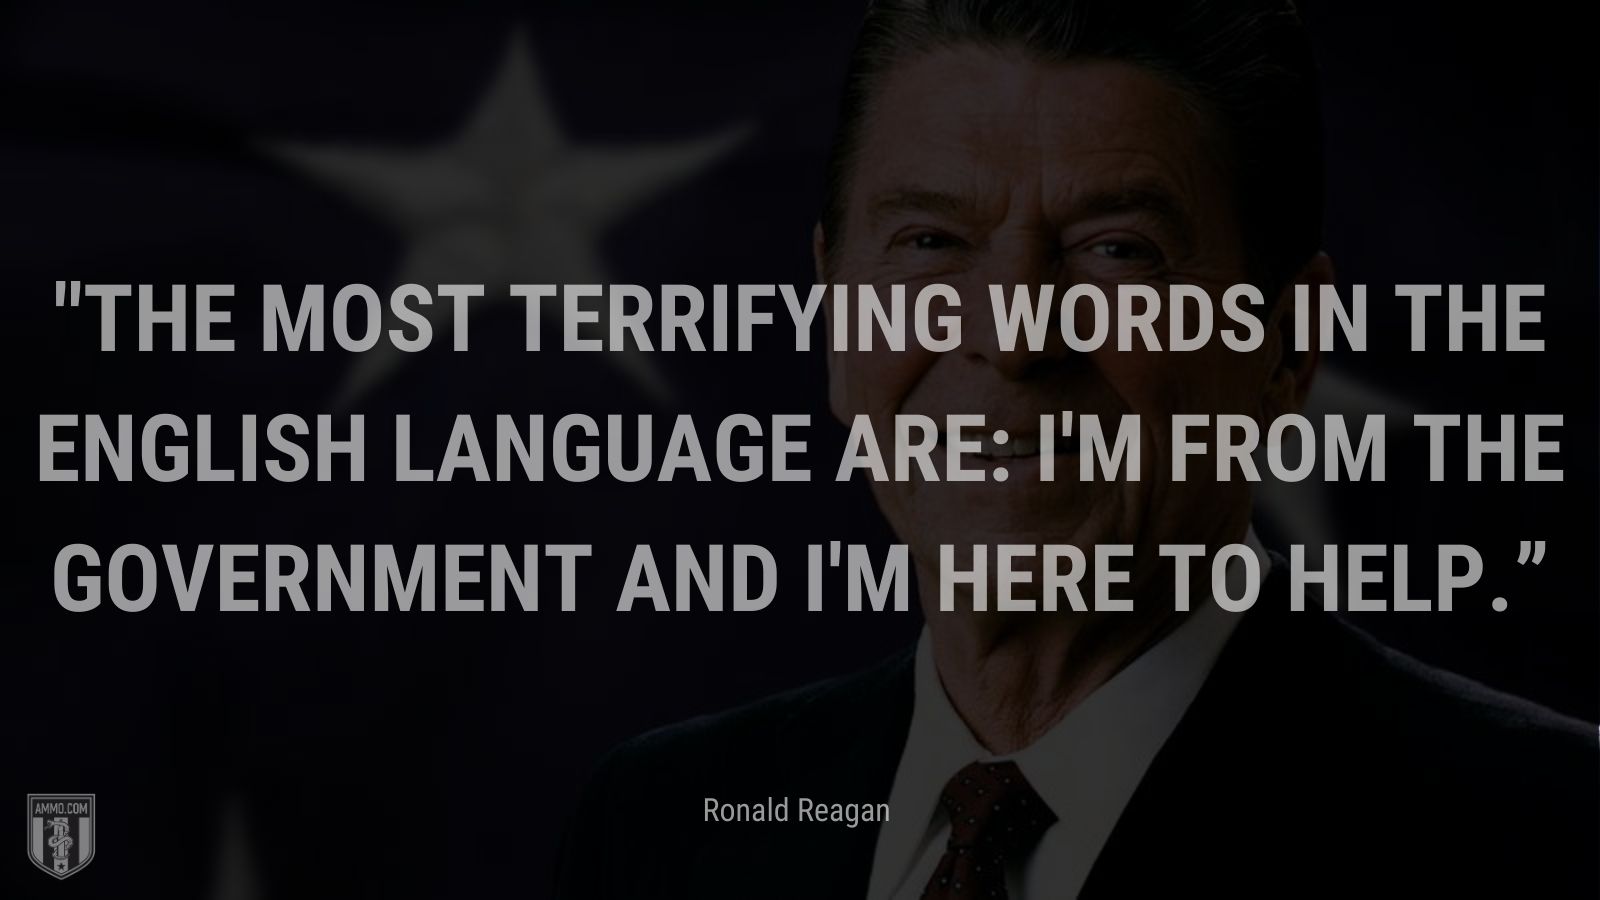 Ronald Reagan Quotes: Quotes by the Iconic American President Ronald Reagan